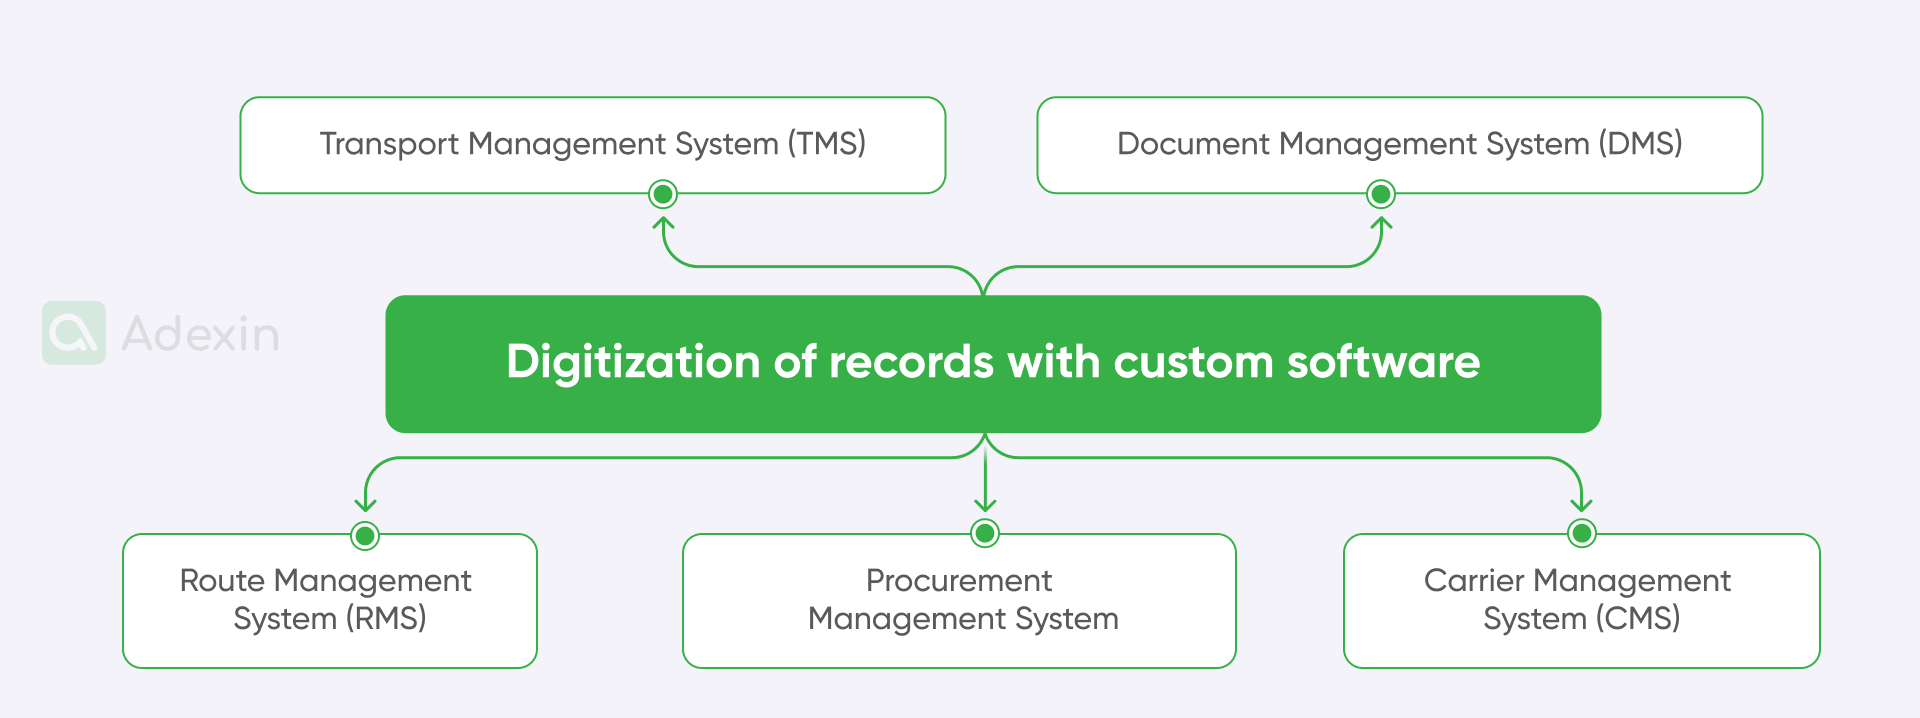 Types of specialized software for digitizing records